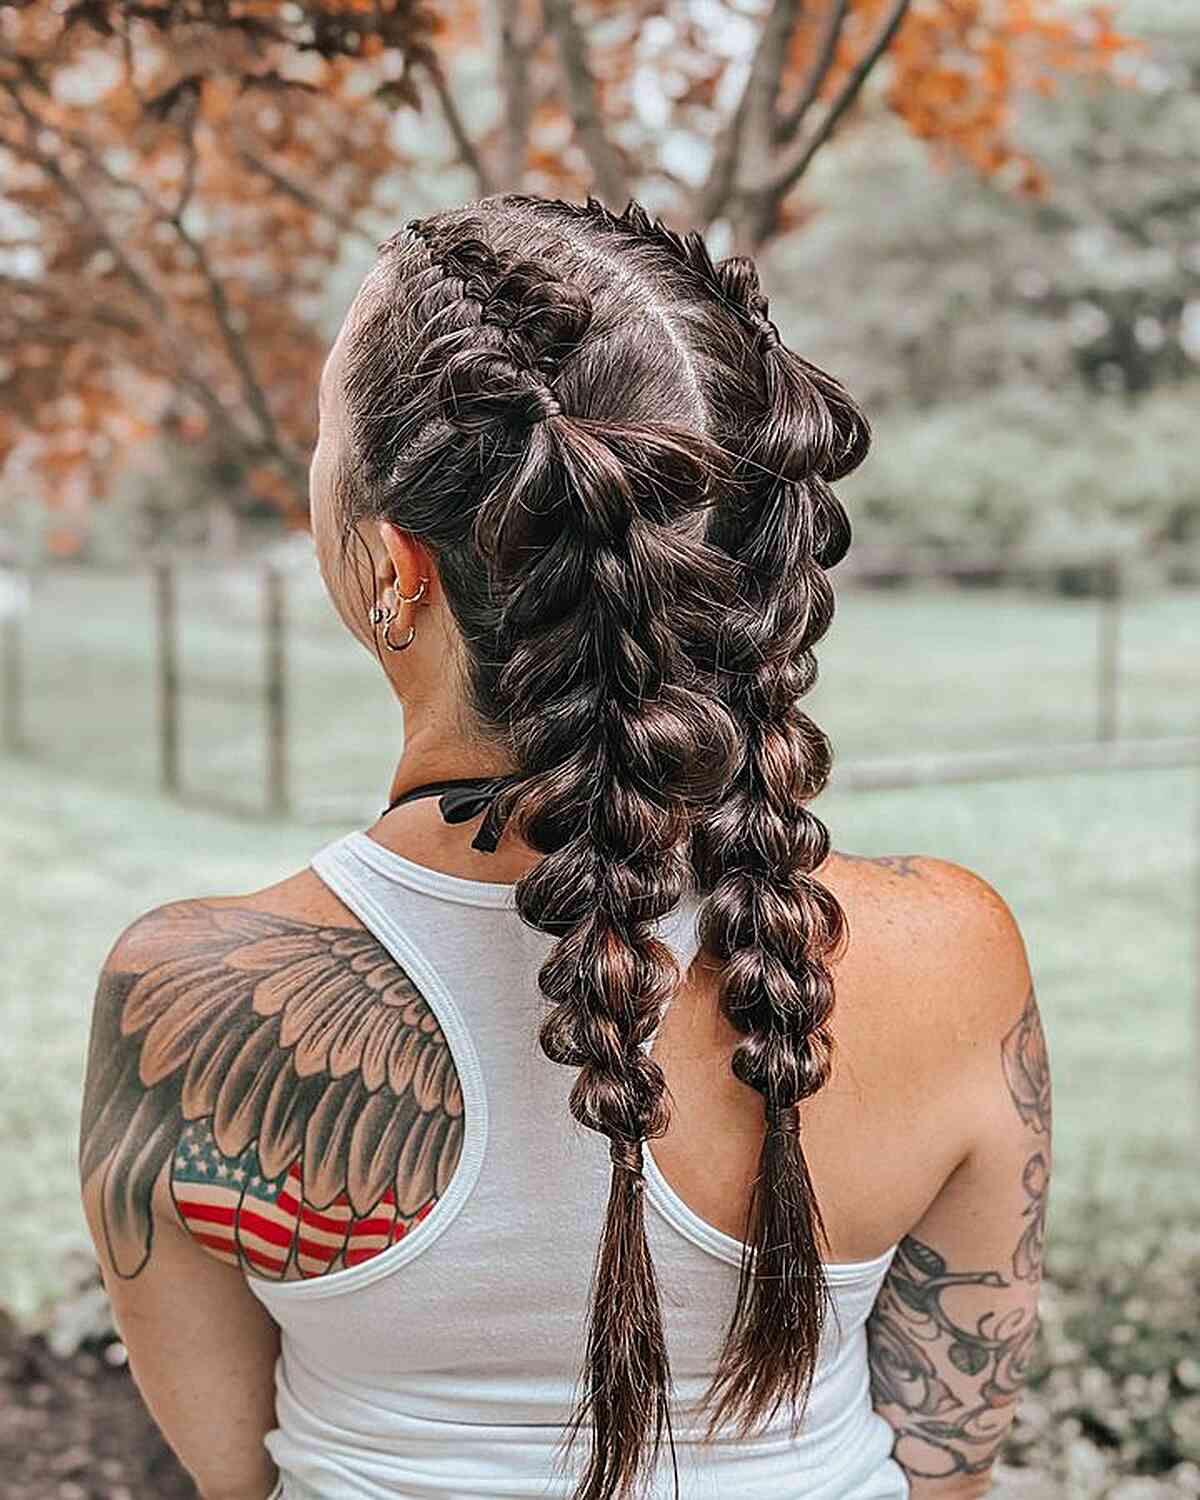 Middle-Parted Double Pigtail Braids for Mid Back-Length Hair